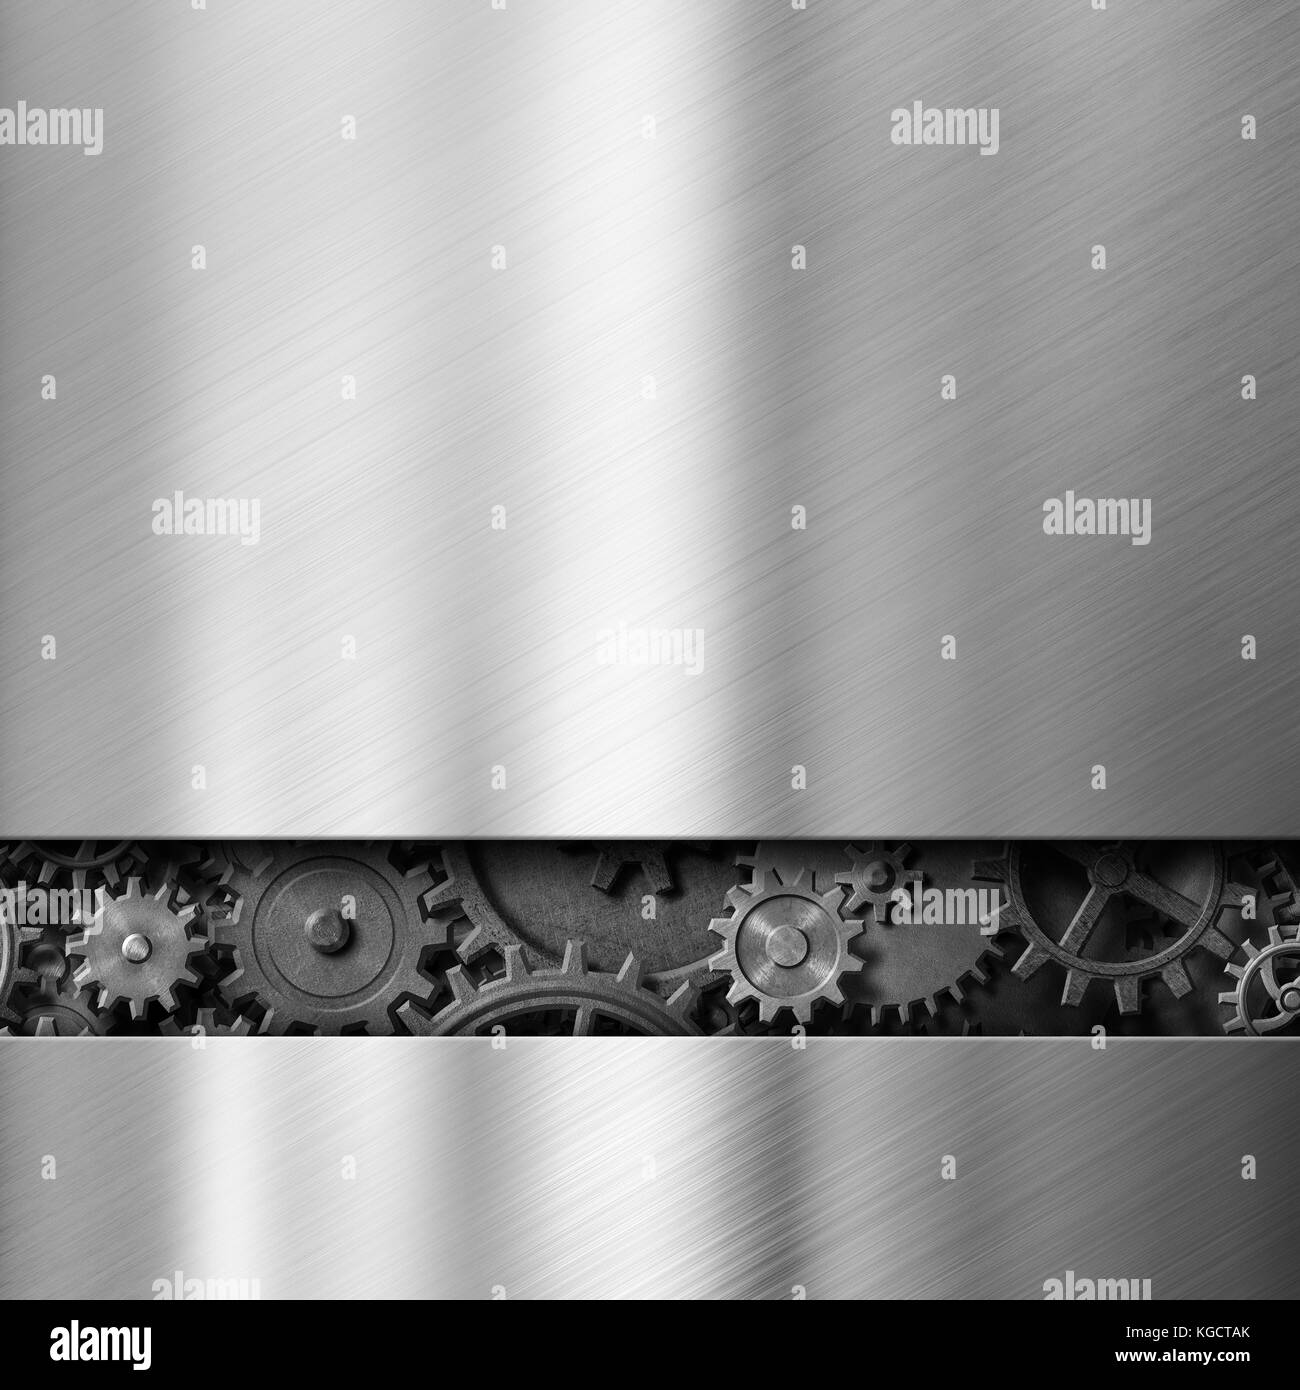 metal background with cogs and gears 3d illustration Stock Photo